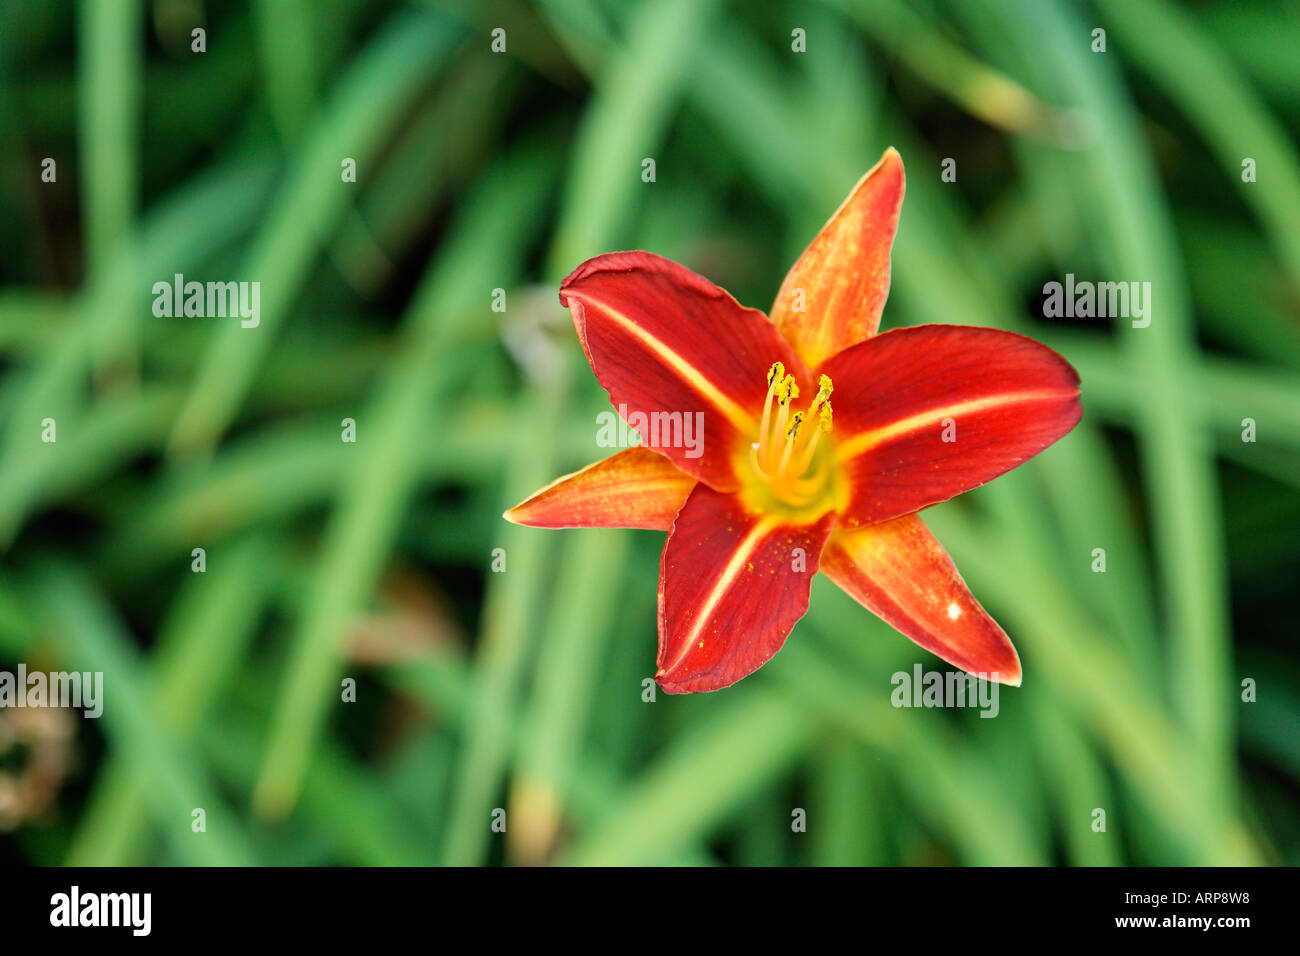 A Red and Yellow Stafford Daylily in Landscape View Stock Photo